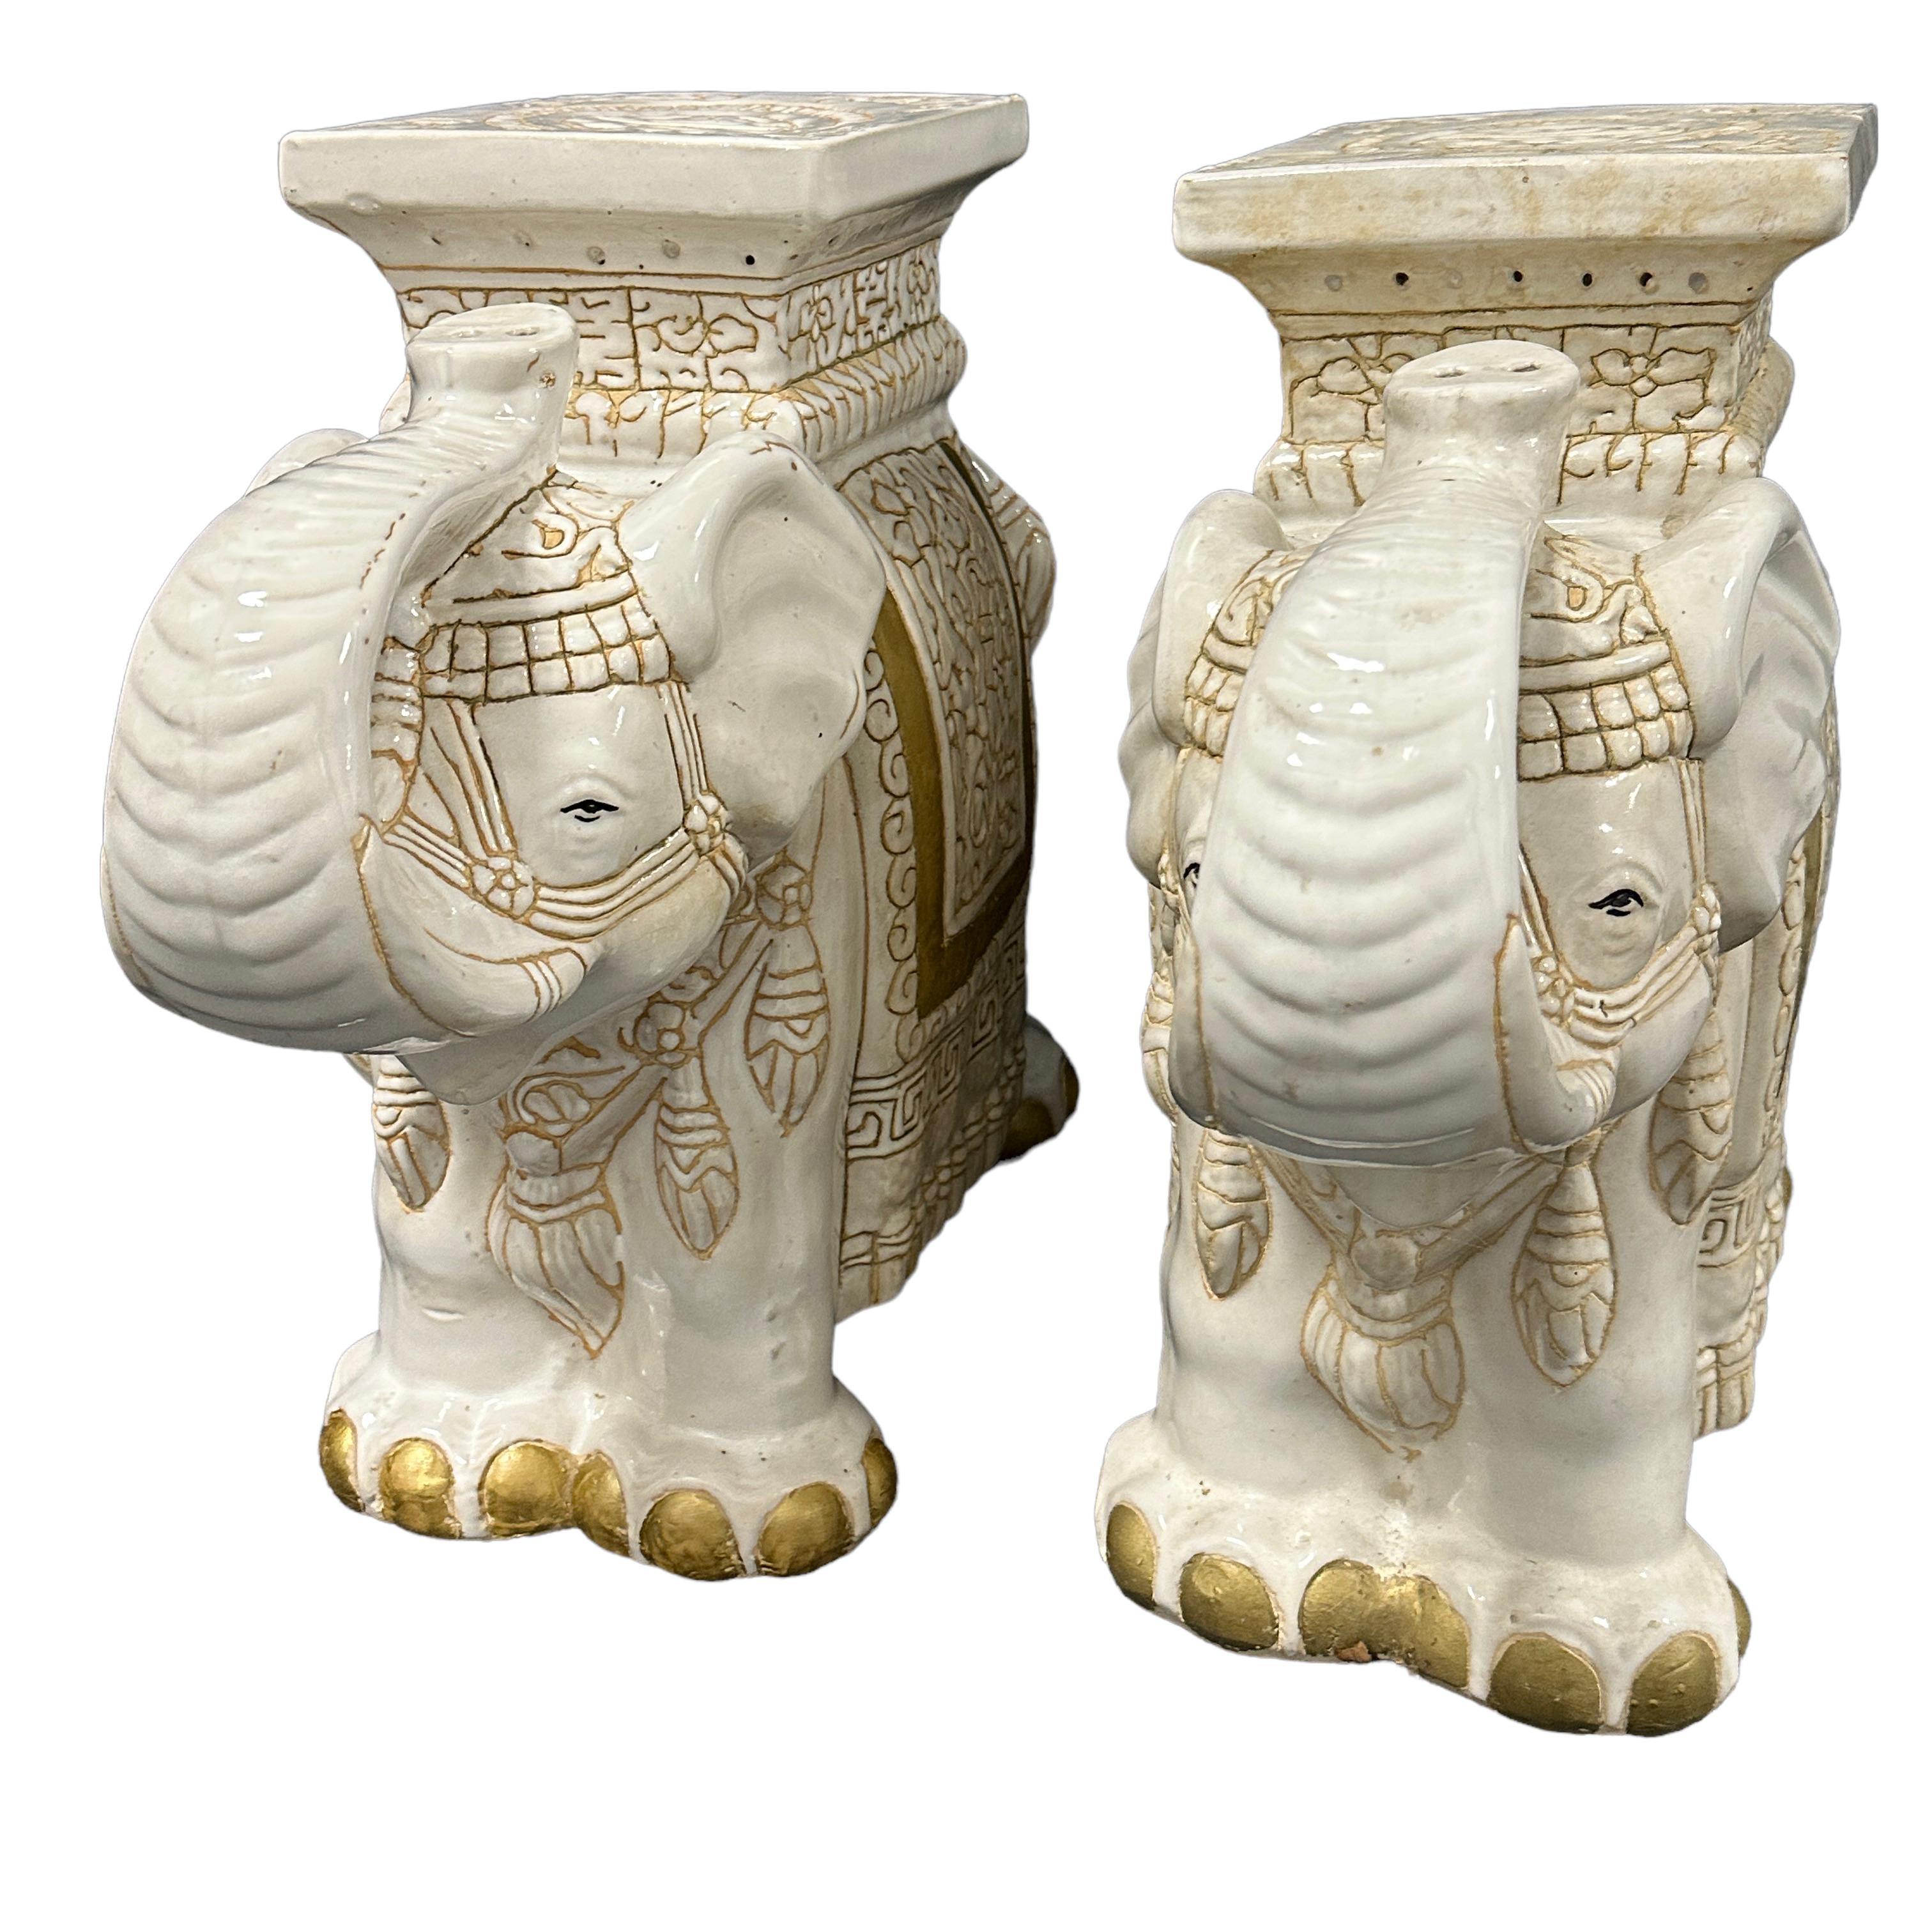 Pair of Mid-20th century glazed ceramic elephant garden stool, flower pot seat or side table. Handmade of ceramic. Nice addition to your home, patio or garden. A nice addition to any room, patio or yard. Also nice at the pool as a drinks stand.
  